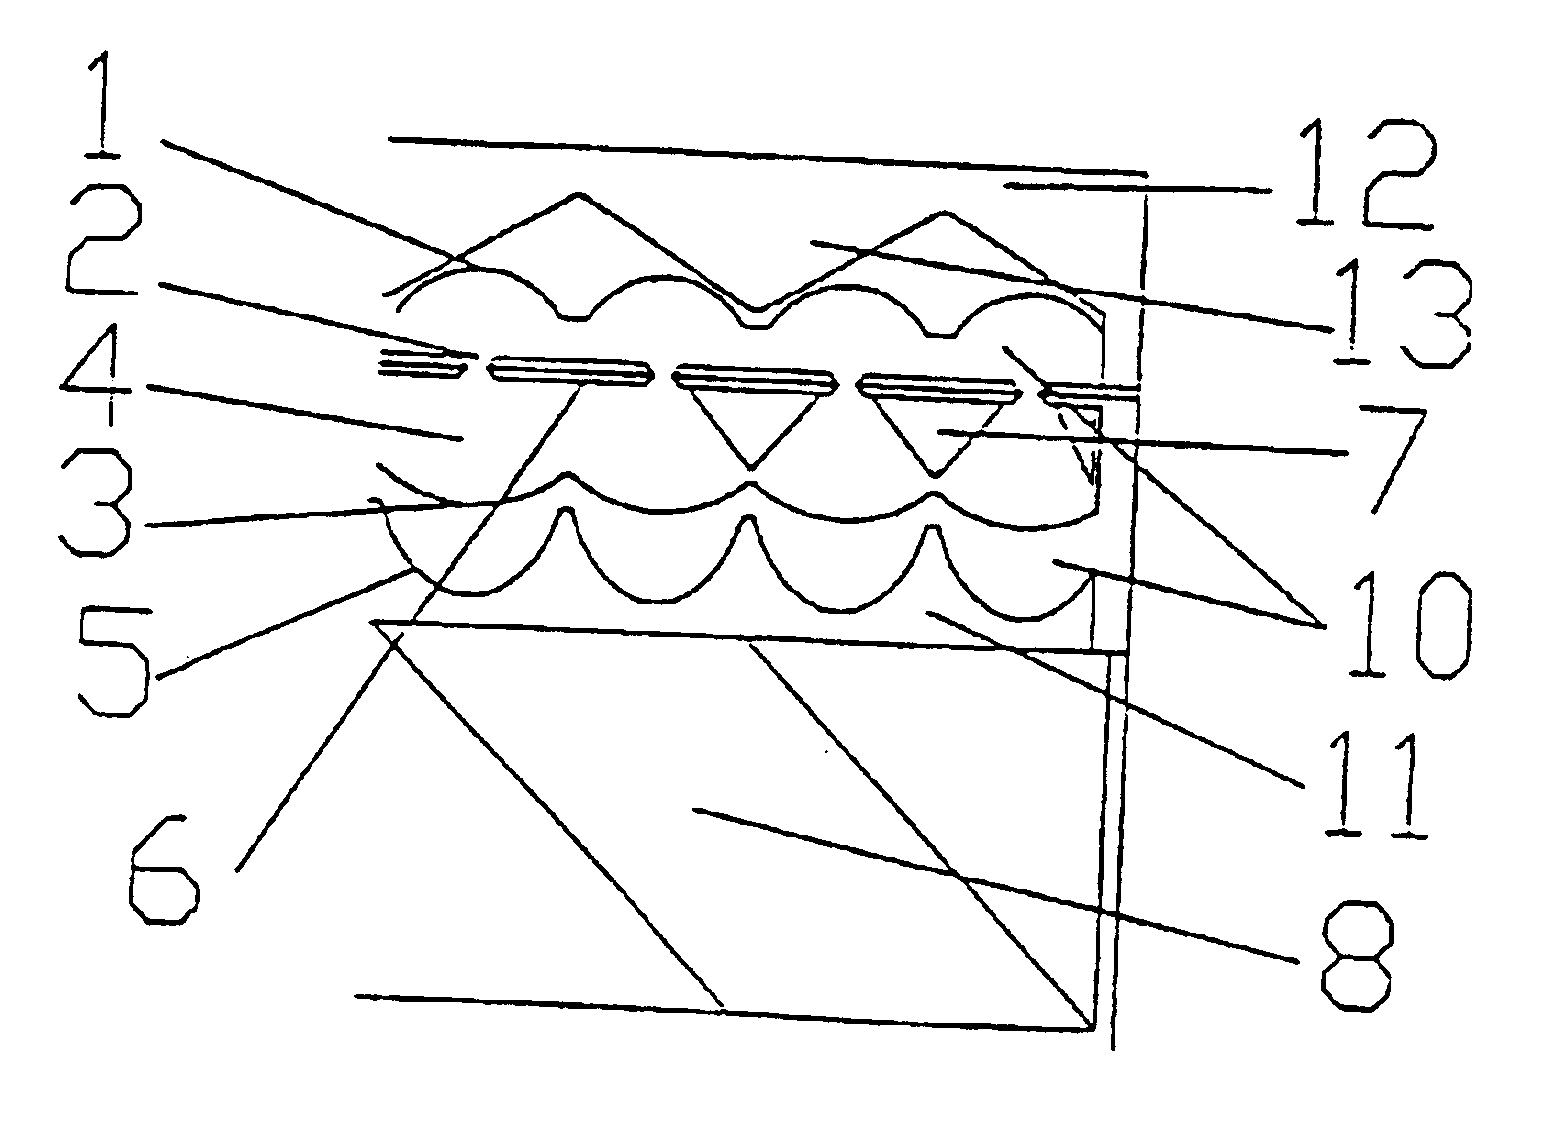 Computer processed integral photography apparatus and process for large 3D image production